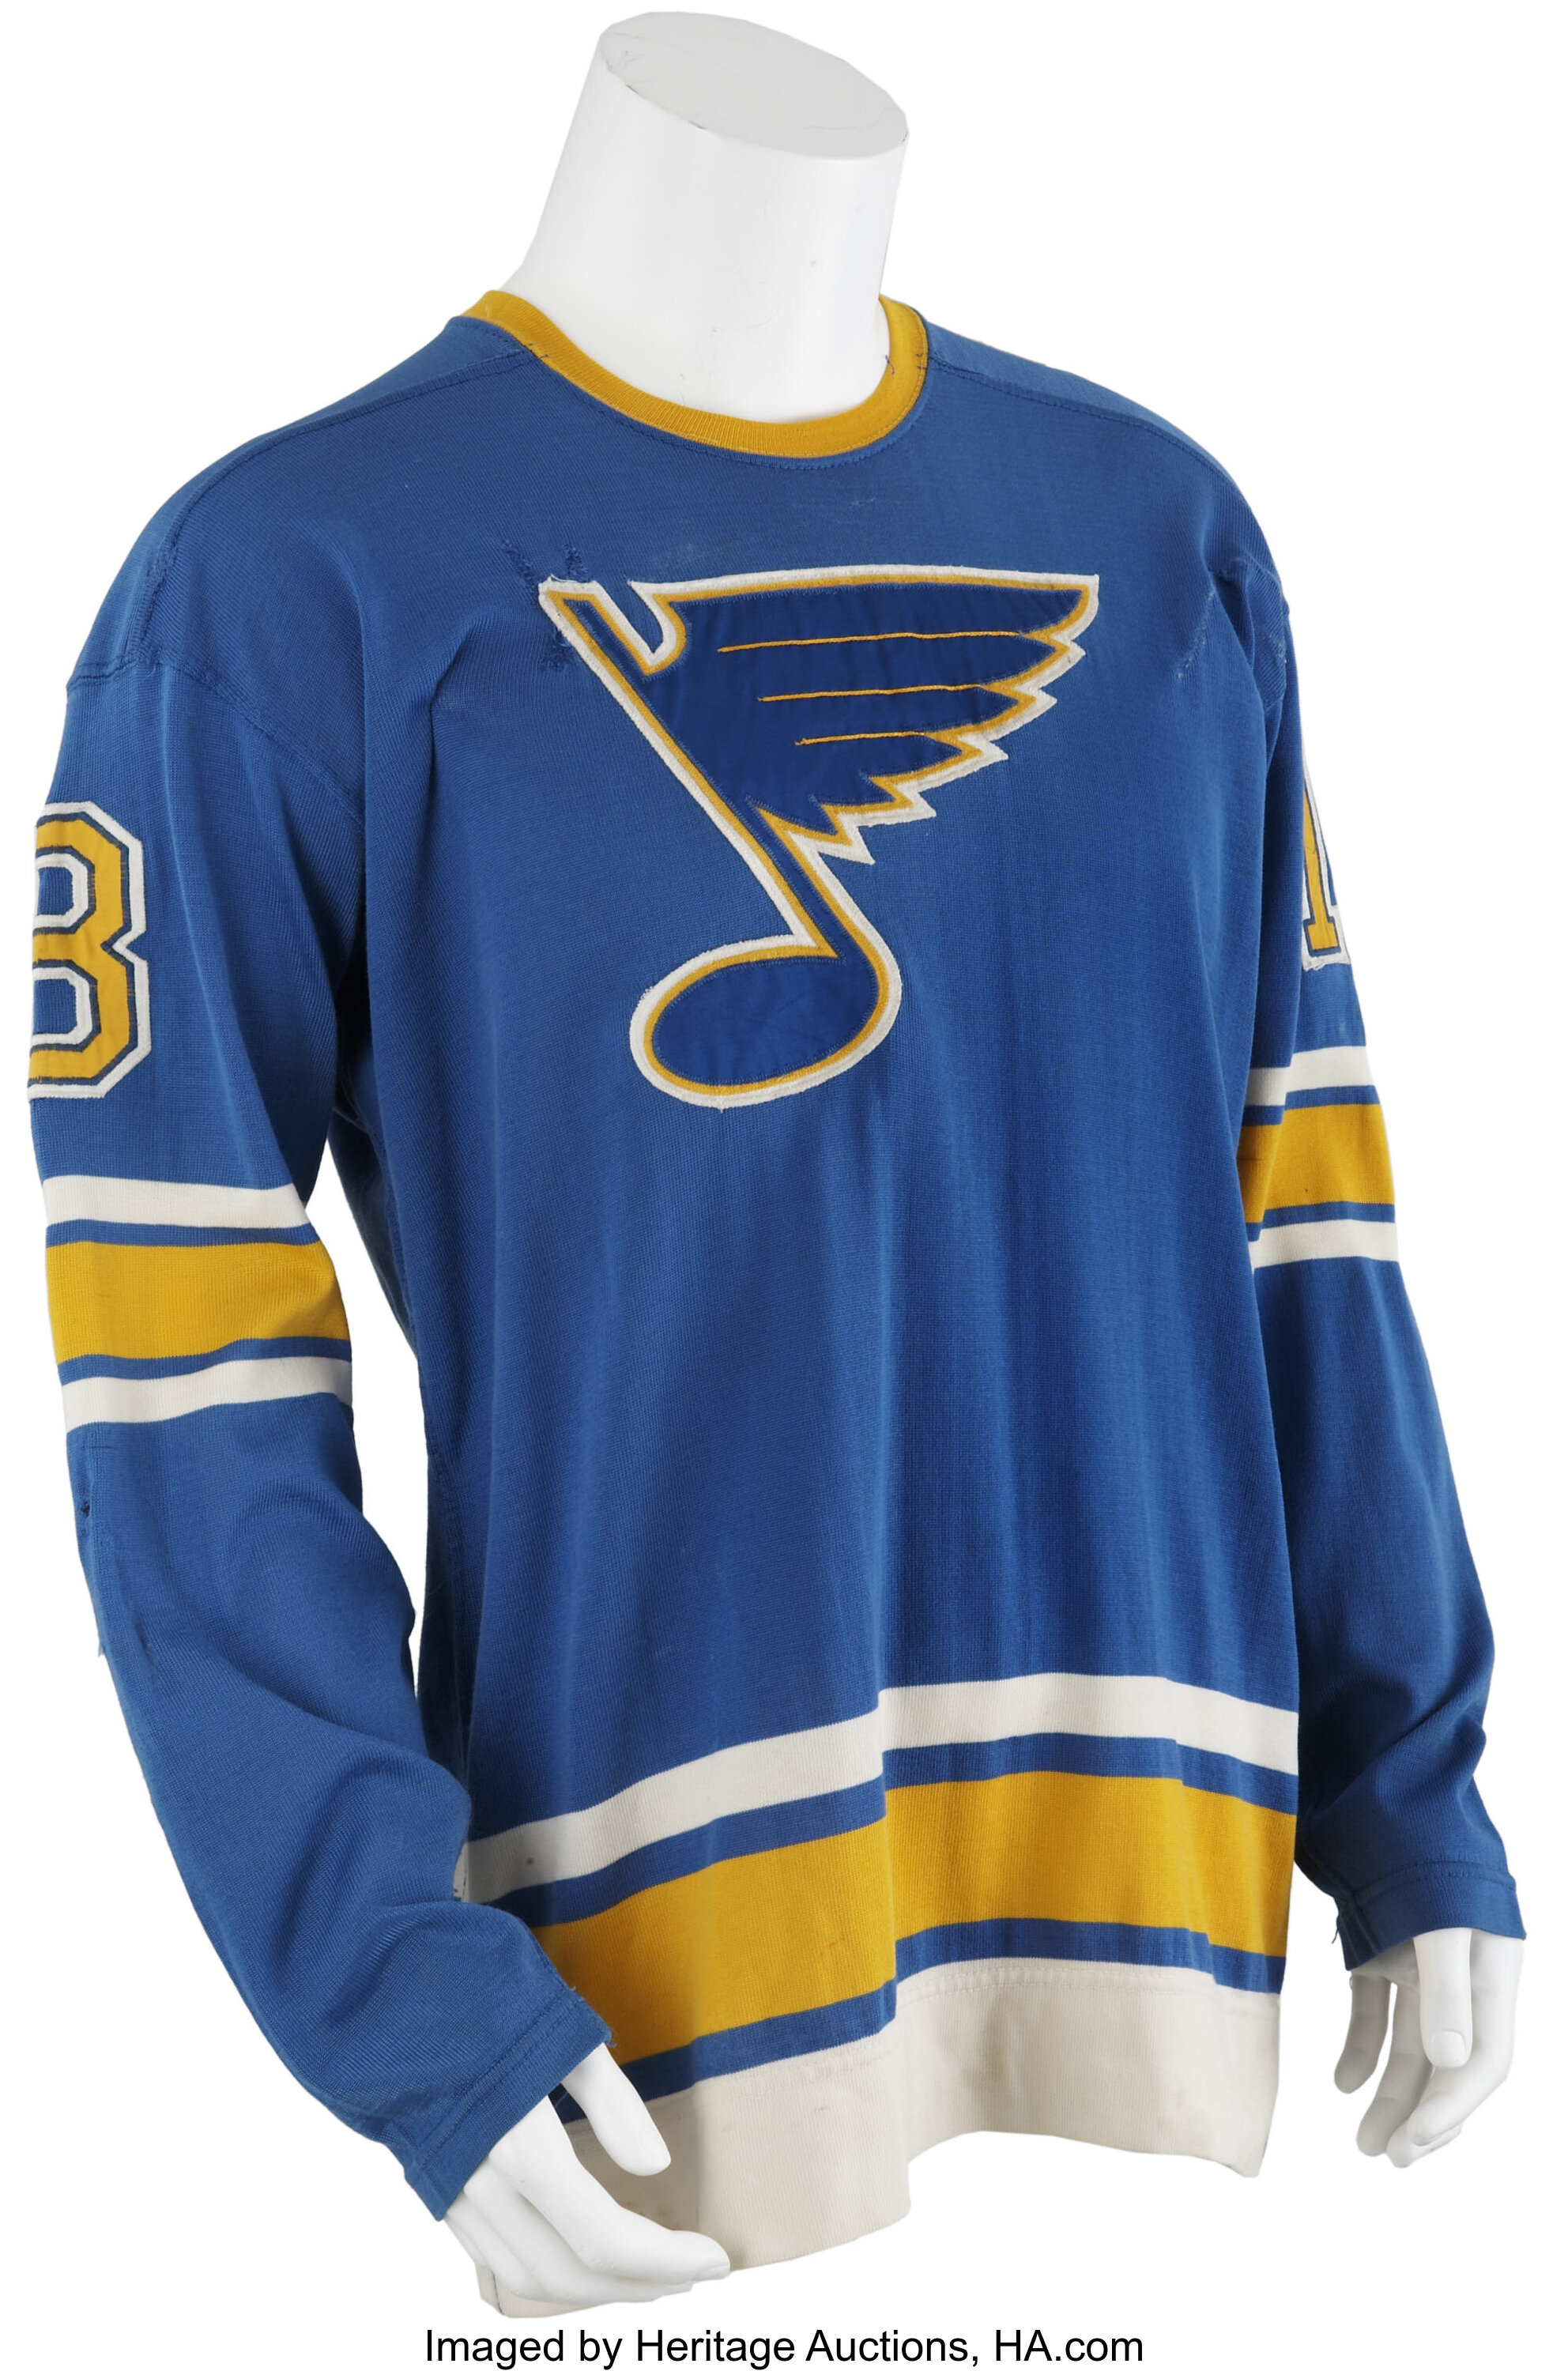 St. Louis Blues Bruton #65 Game Used White Jersey Traverse City DP12375